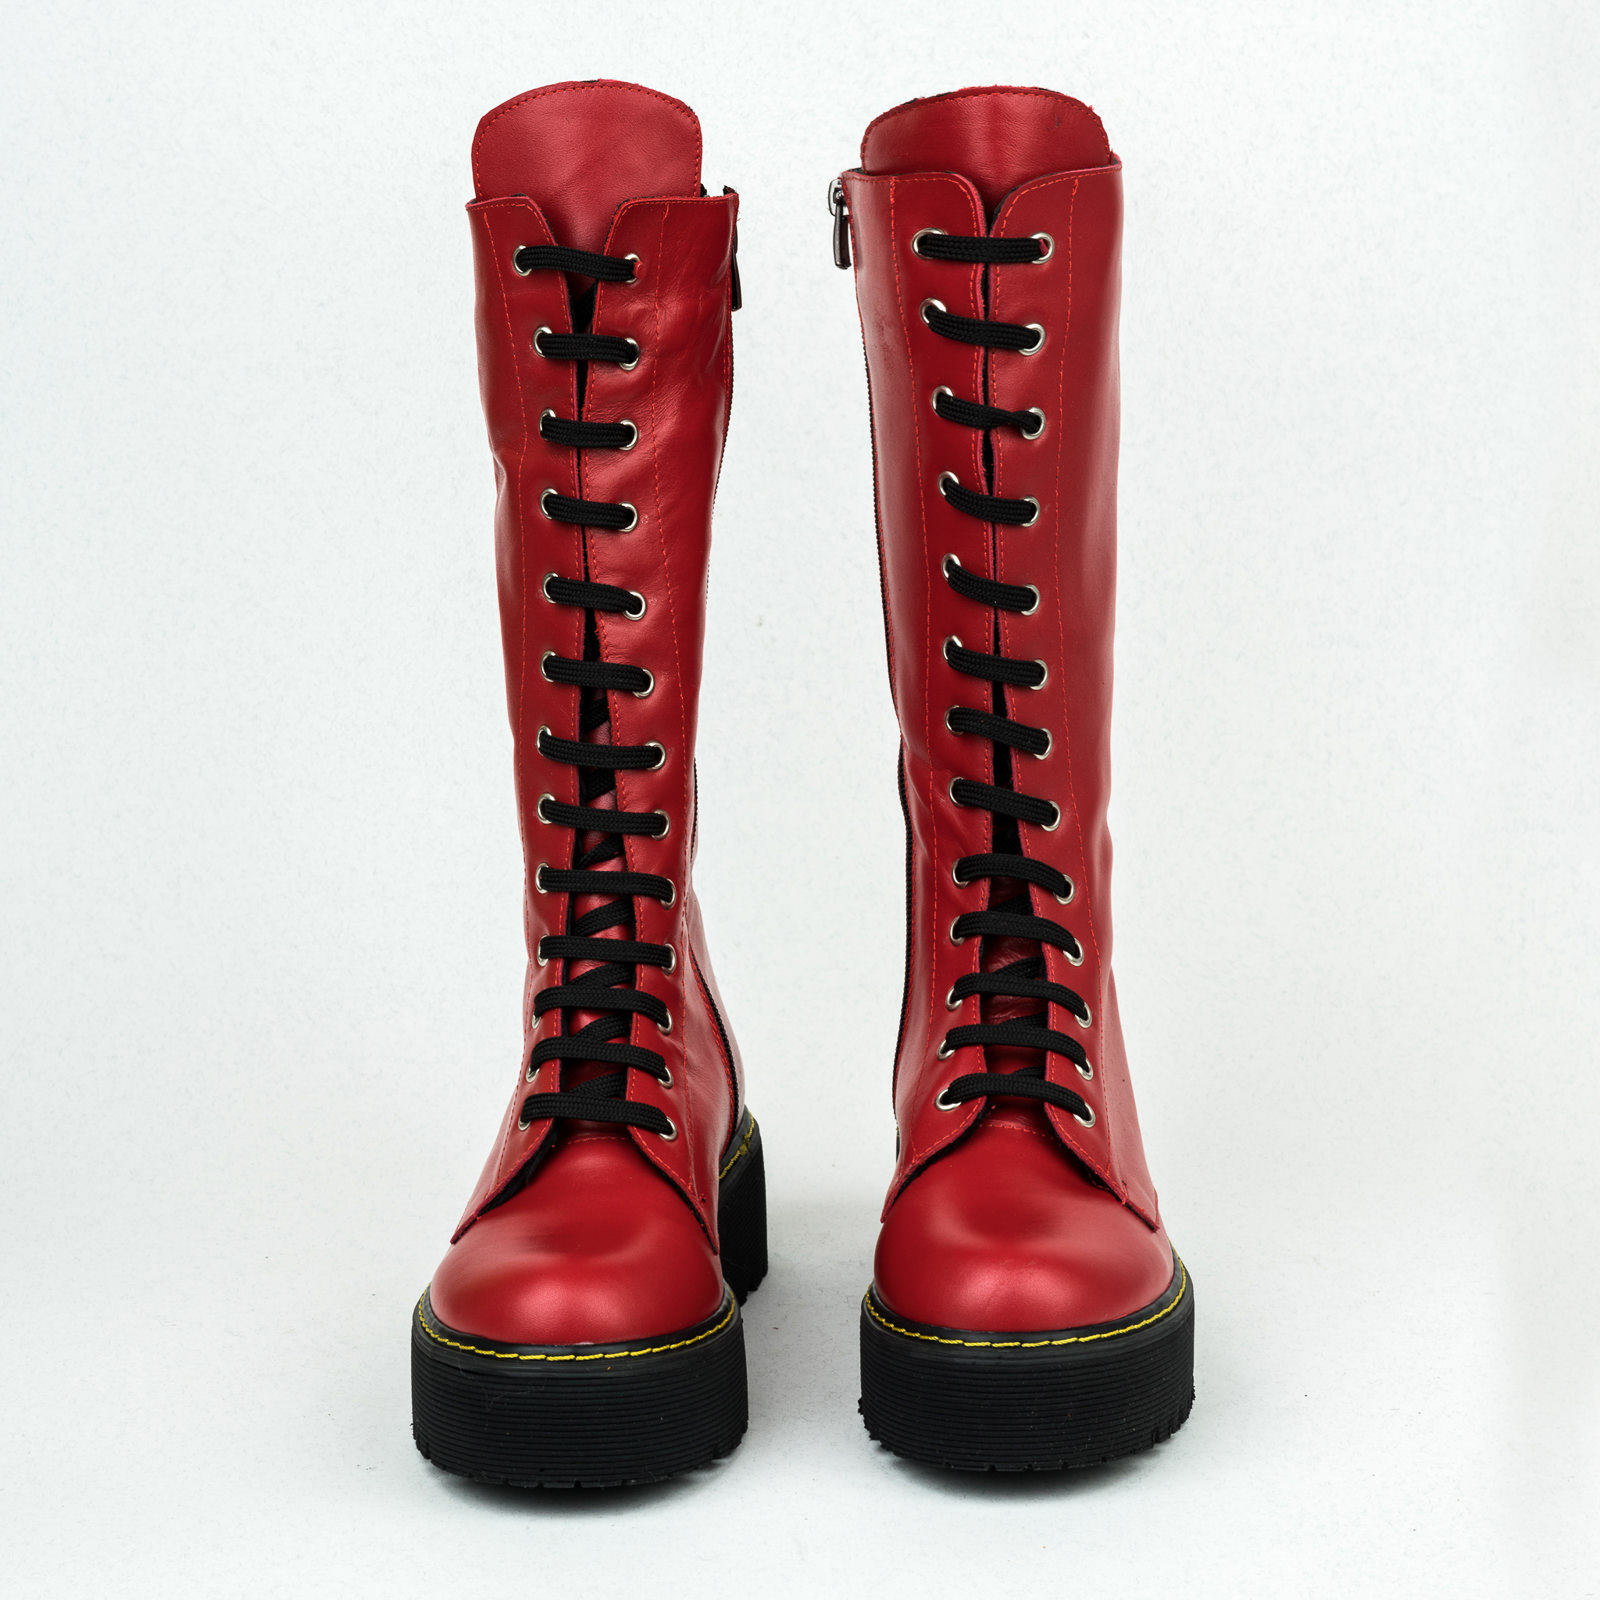 Leather WATERPROOF boots B151 - RED